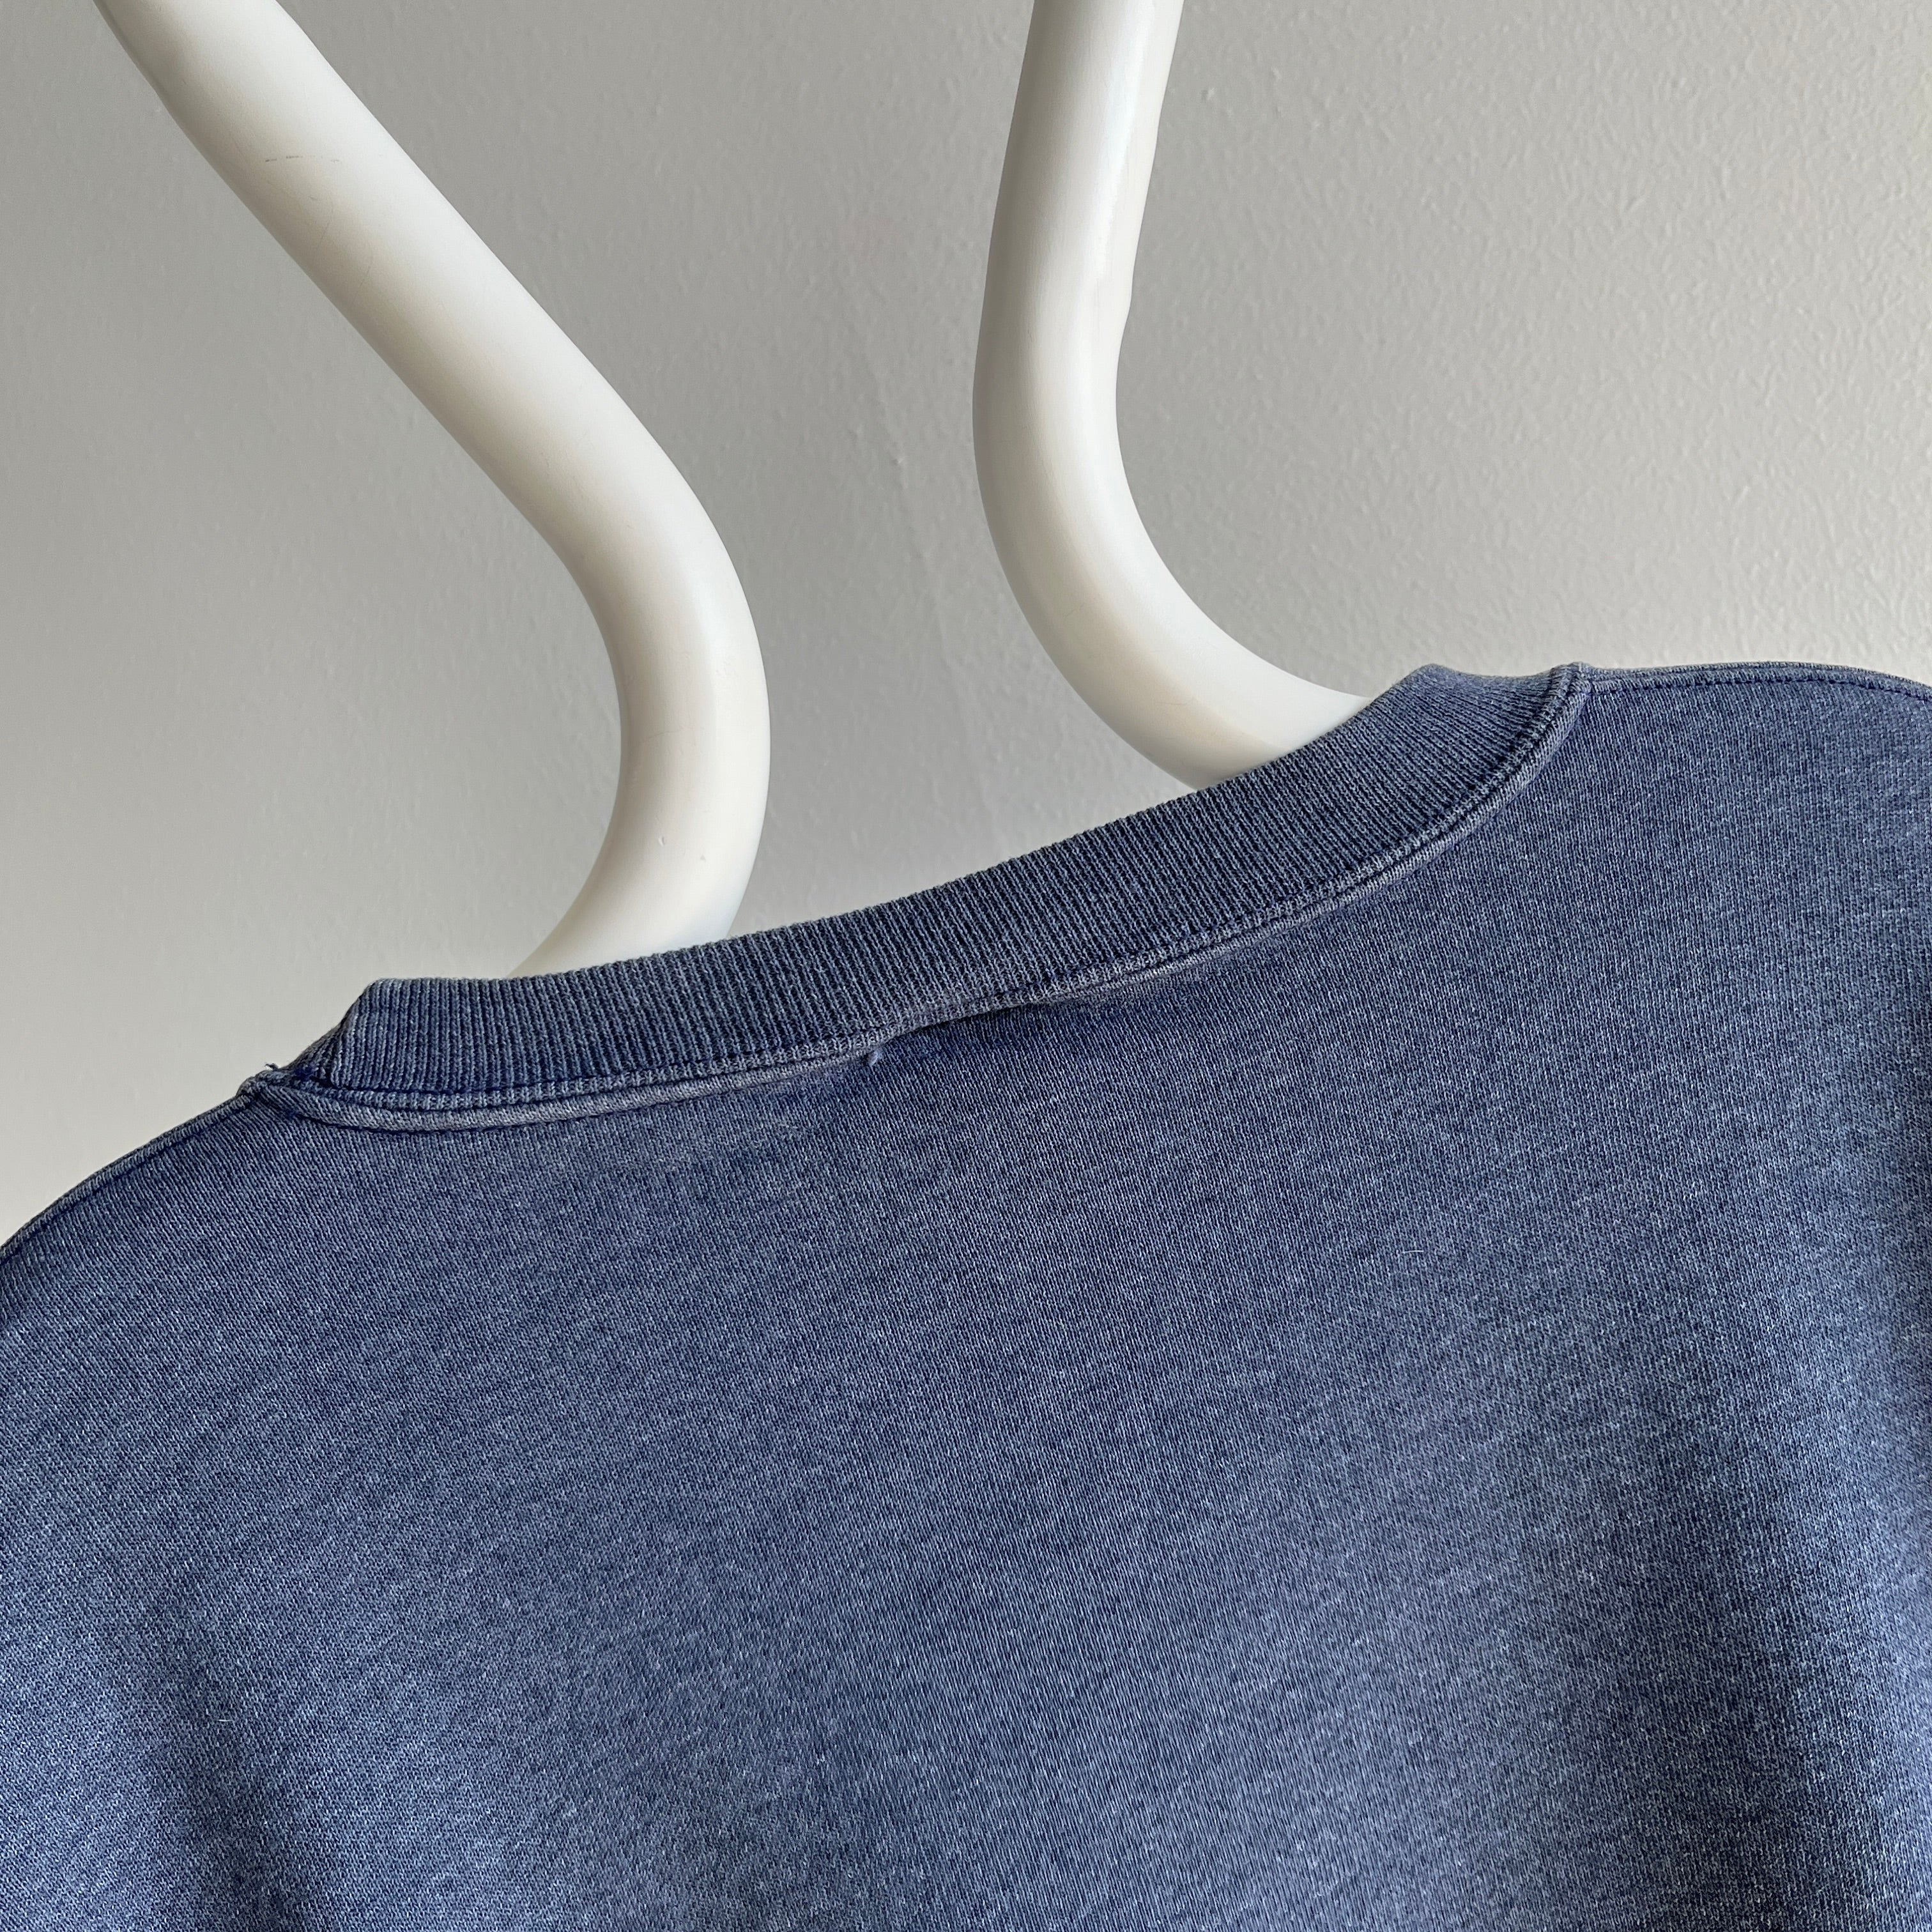 1990s Slate Blue Single V Larger Sweatshirt by Russell Brand